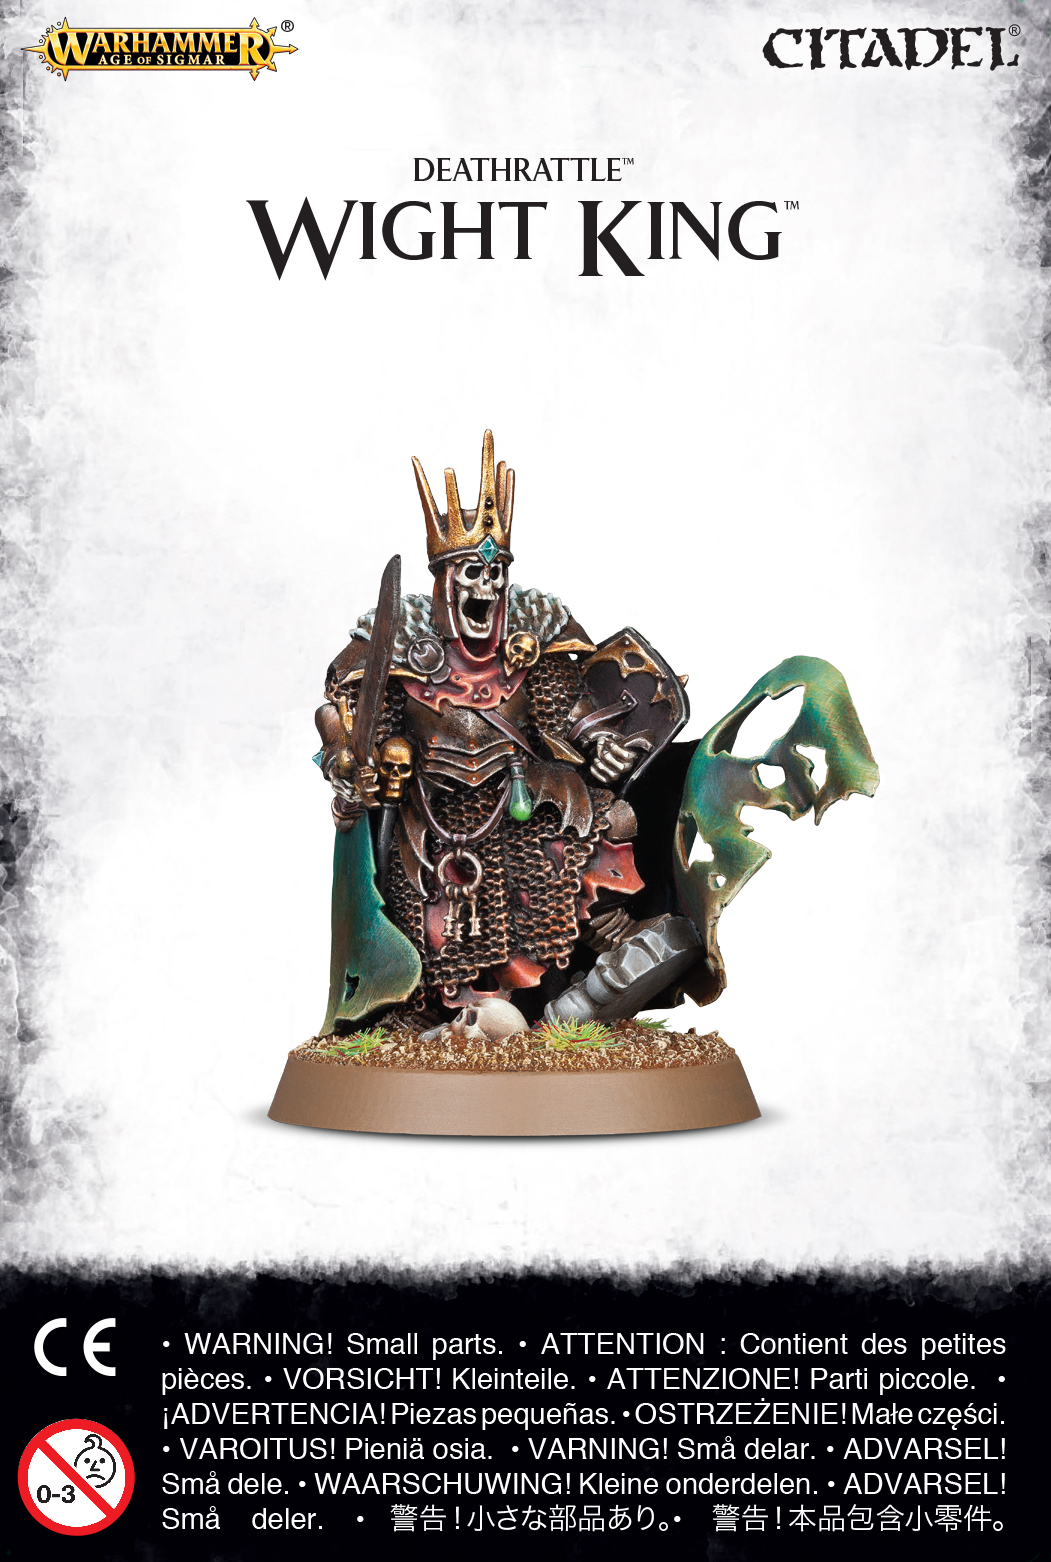 Wight King - 91-31 - Deathrattle - Warhammer Age of Sigmar